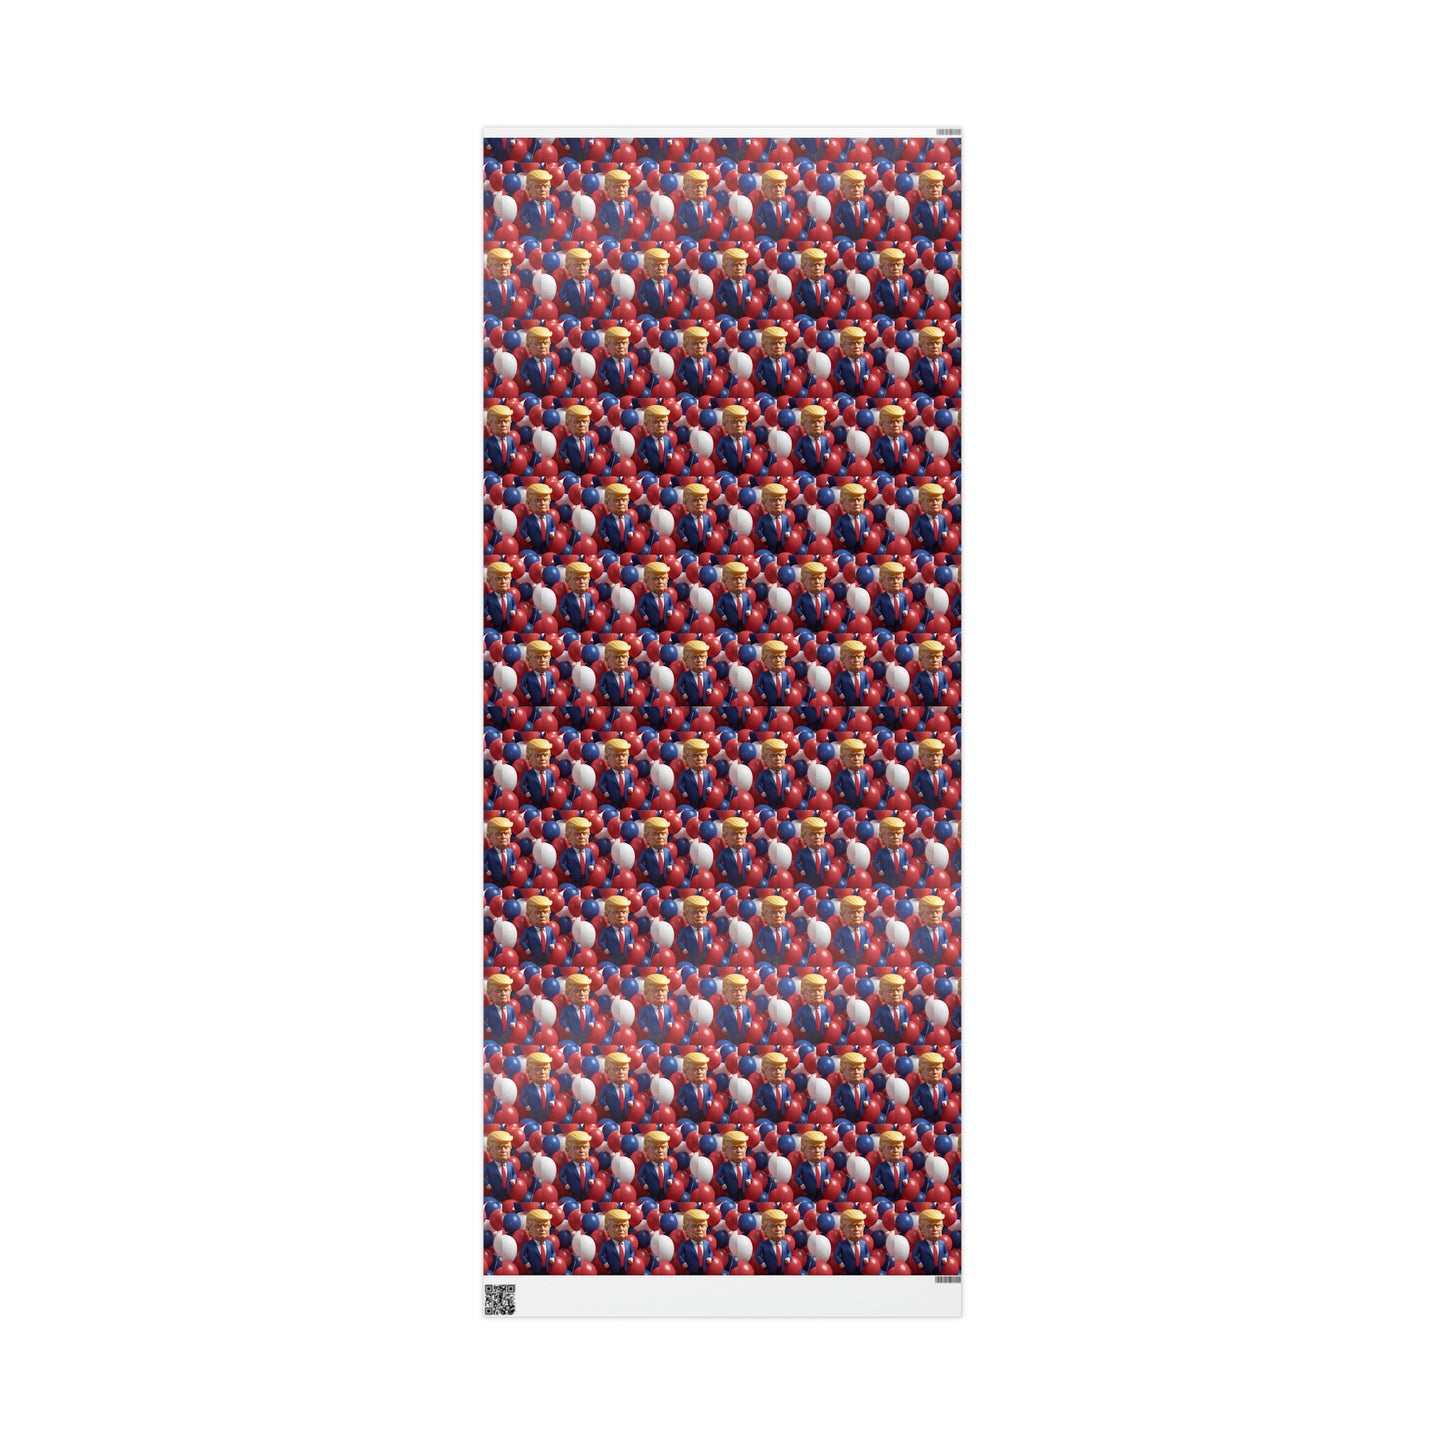 Trump Balloons Happy Birthday Red White MAGA Birthday Gift Present Wrapping Paper